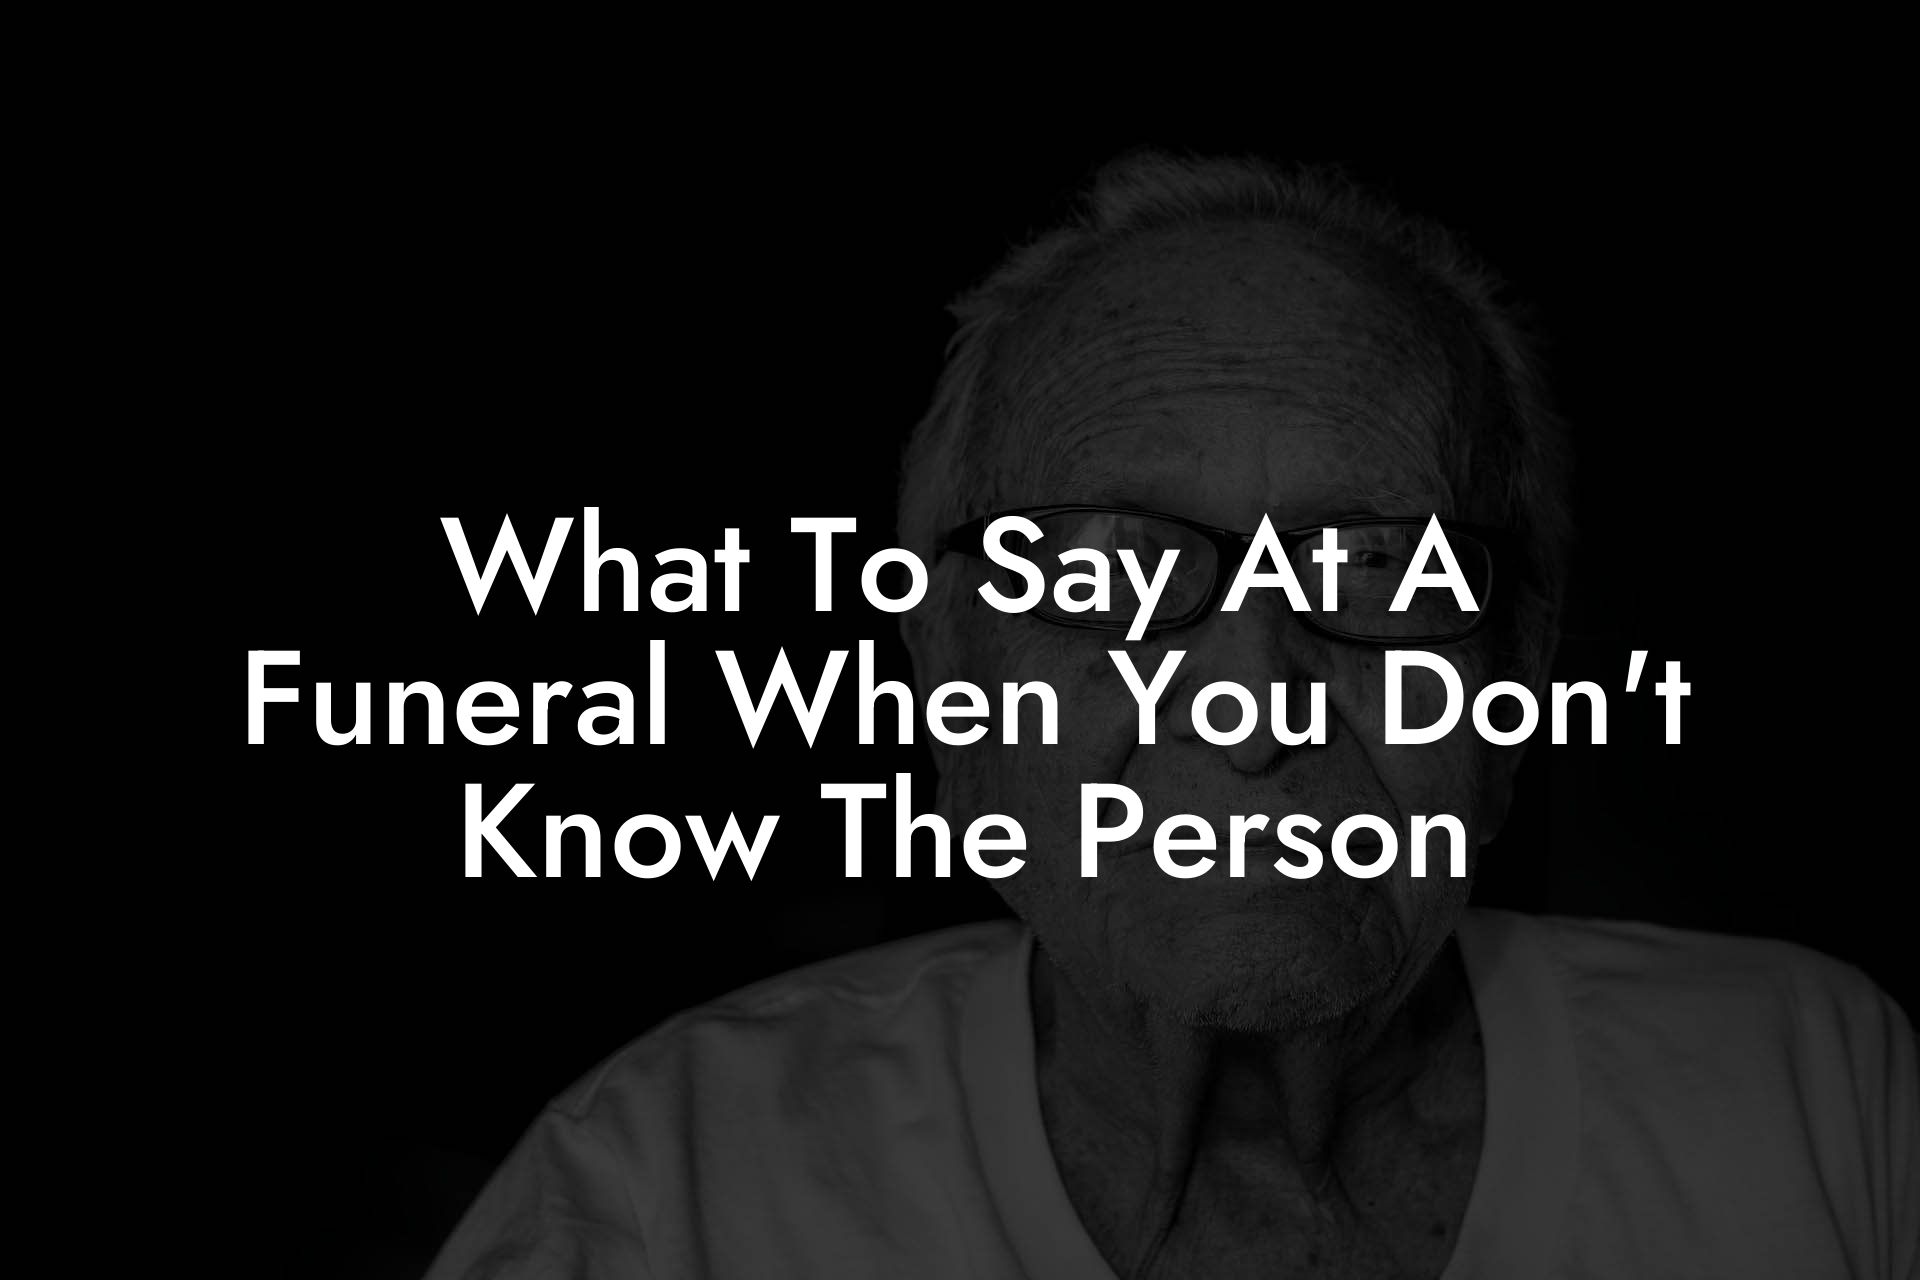 What To Say At A Funeral When You Don't Know The Person